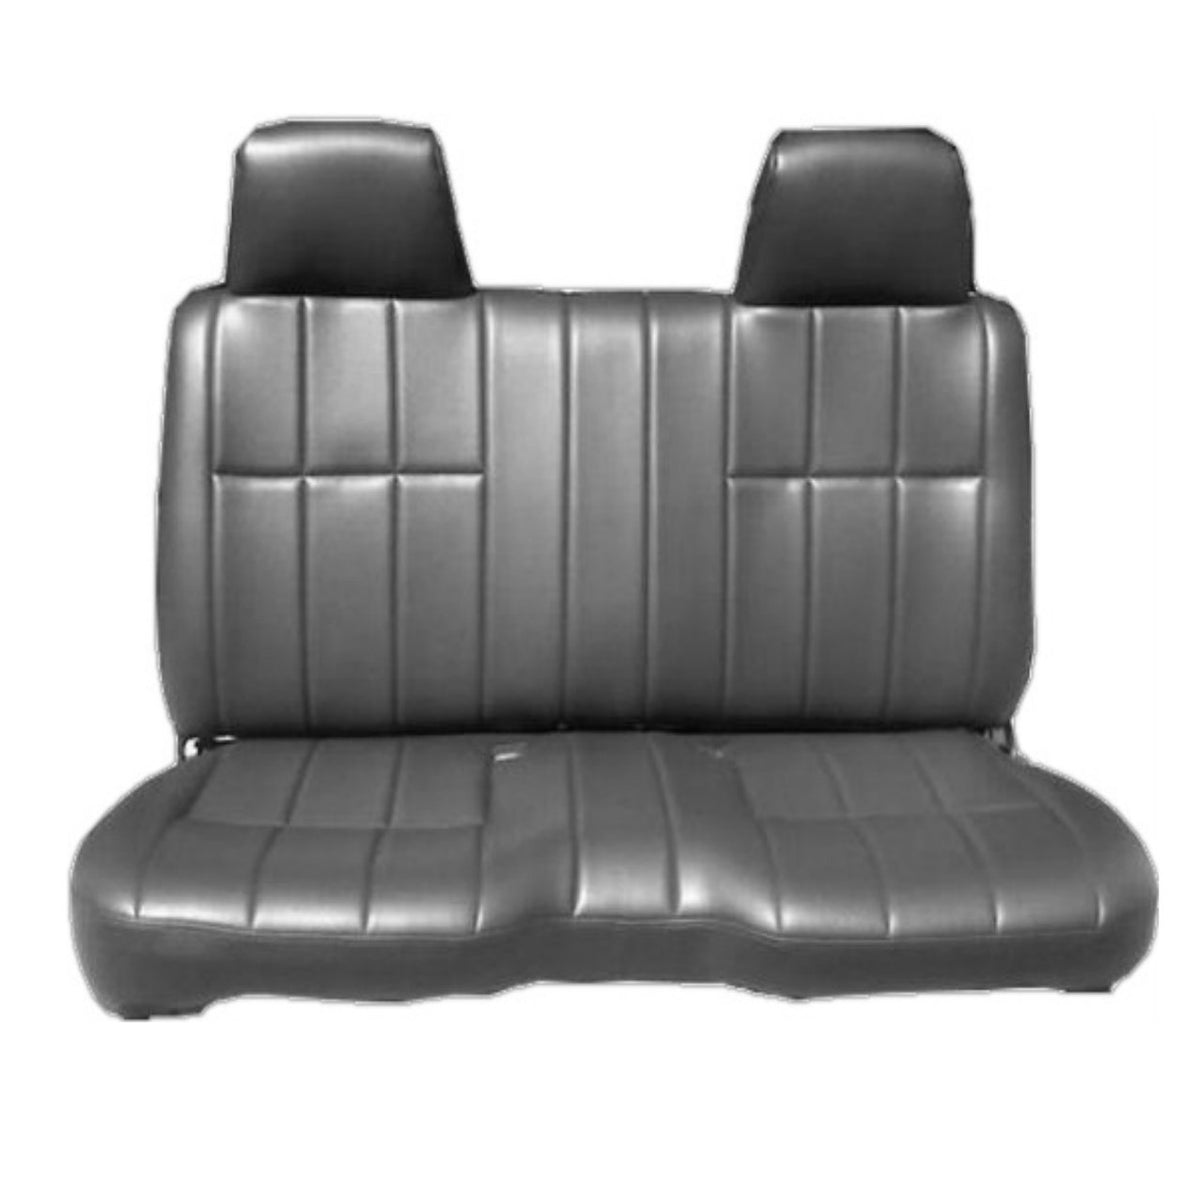 Toyota Pickup Geniune PU Leather Front Bench Seat Cover Exact